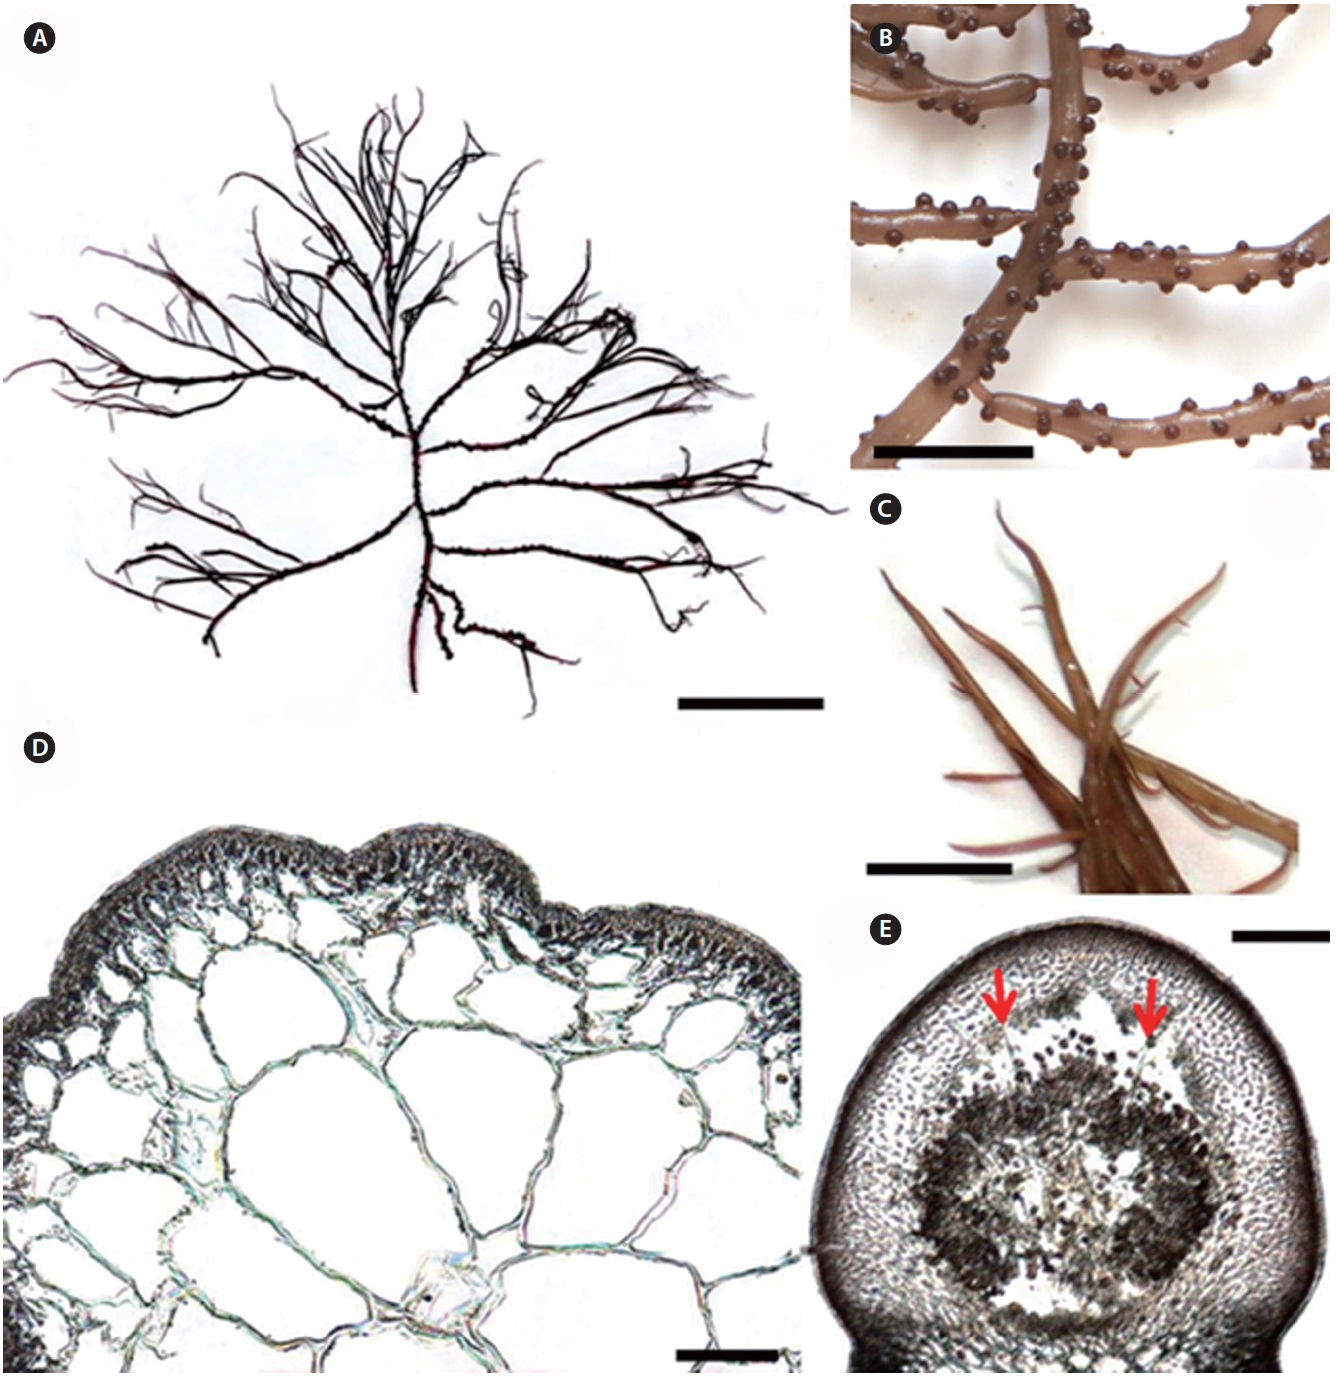 Gracilaria sp. (A) Herbarium specimen collected from Matou, Sanya, Hainan in January 29, 2010. (B) Shape of markedly constricted branches bearing many cystocarps. (C) The apical part of the branches tapering gradually toward apex. (D) Transverse section of the main axis showing the abrupt transition in medullary cell size and small-celled cortex. (E) Vertical section of cystocarp showing two nutritive filaments (arrows). Scale bars represent: A, 3 cm; B & C, 1 cm; D & E, 200 μm.